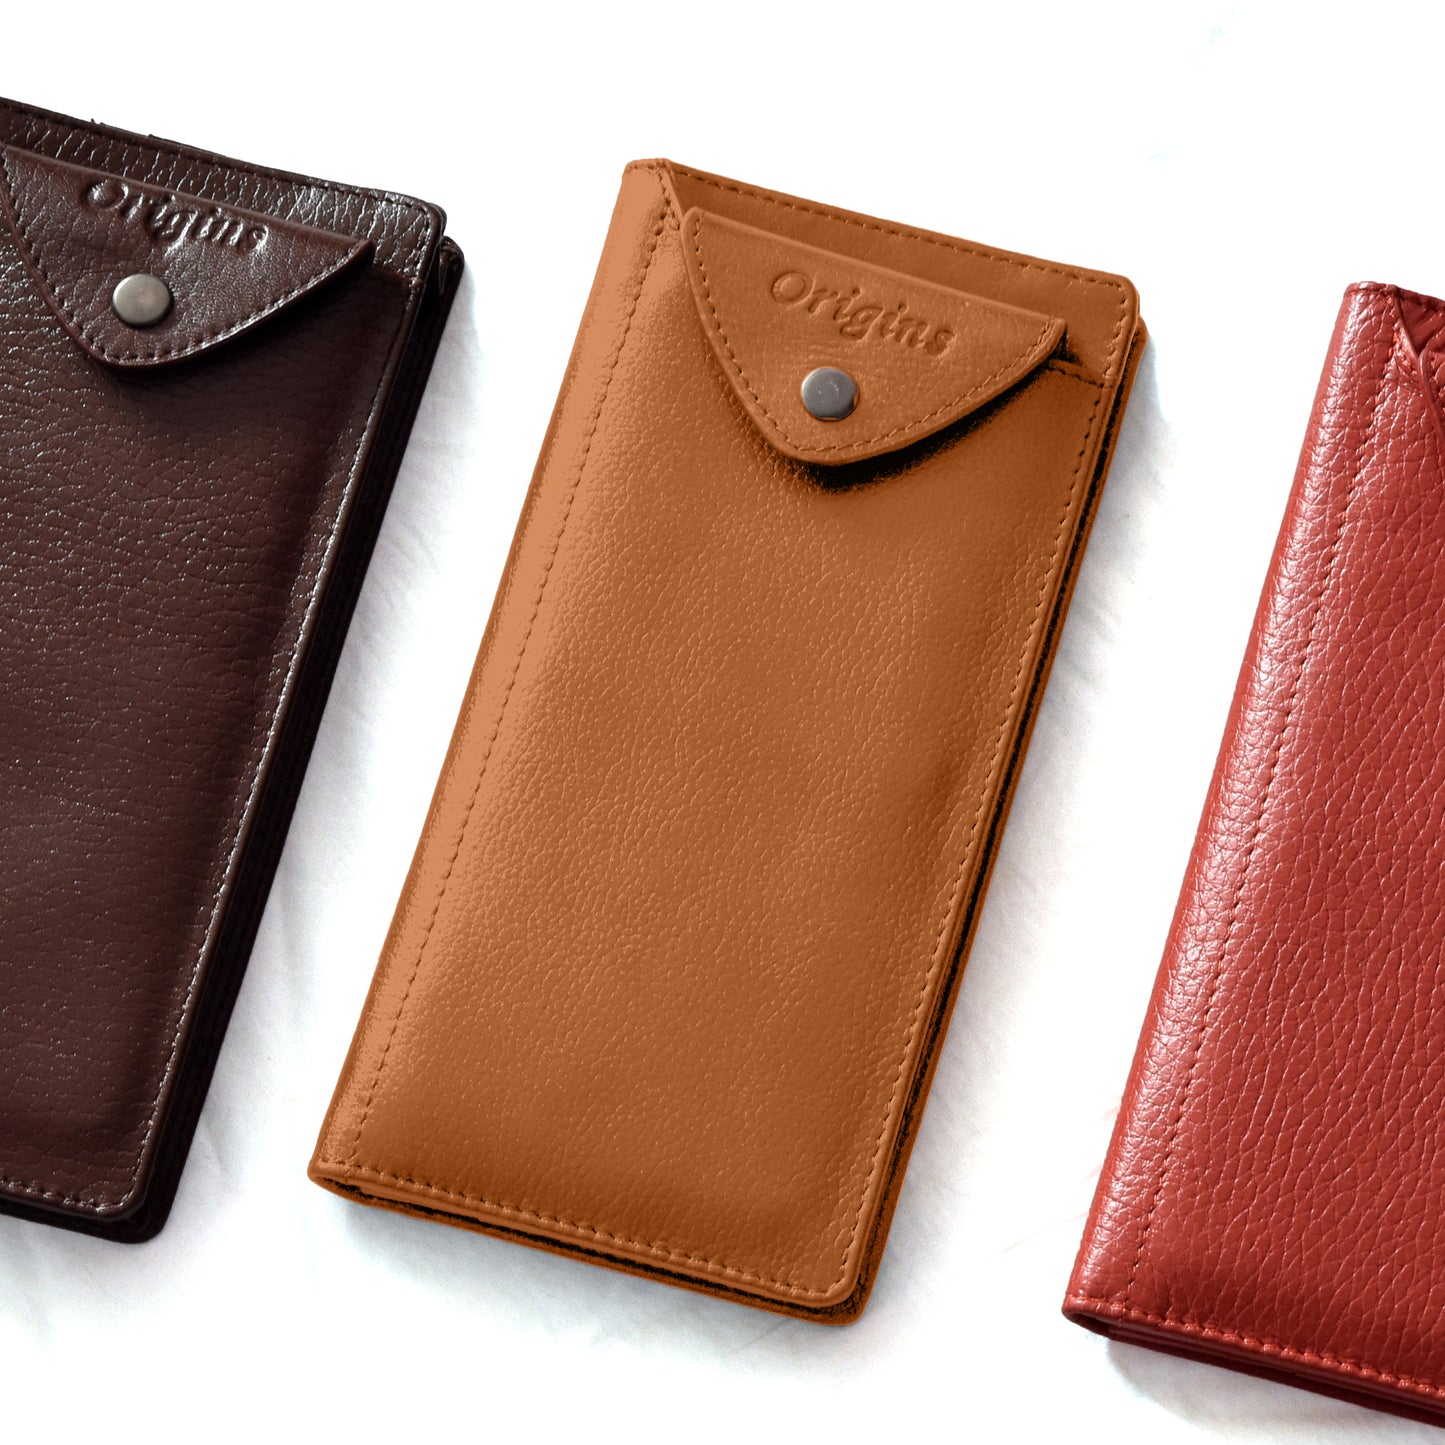 Premium Quality Original Leather Long Wallet with Extra Card Slot | ORGN Wallet 11